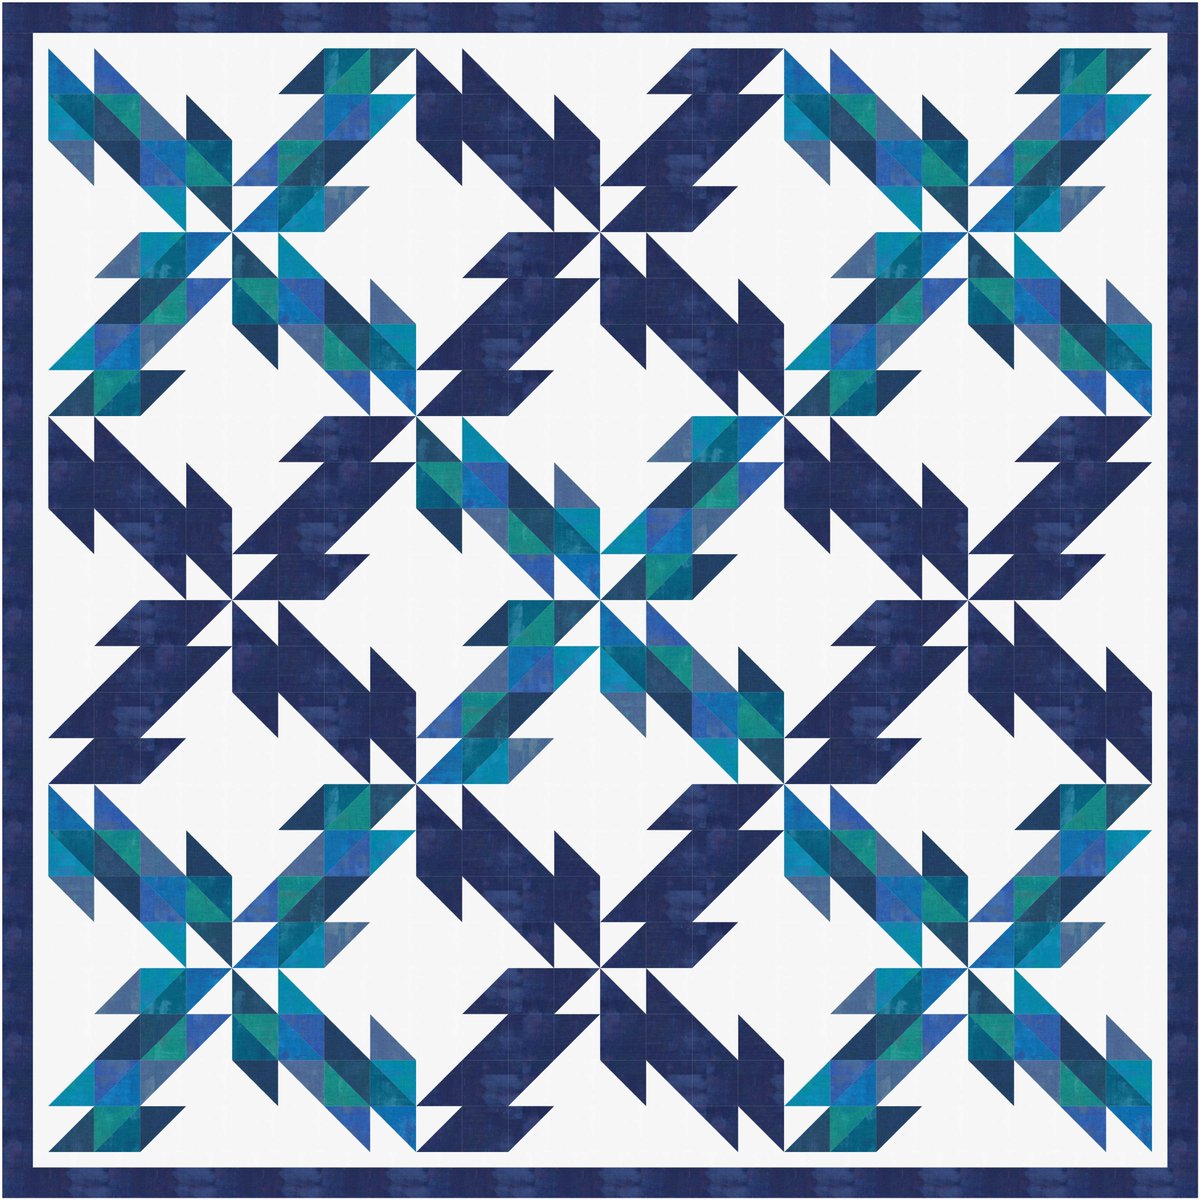 Playing around with my #quilt design software.
Halfsquaretriangles will forever be my favorite block, they're just so endlessly versatile!🤩
#quiltdesign #EQ8 #starquilt #ndCCDesigns